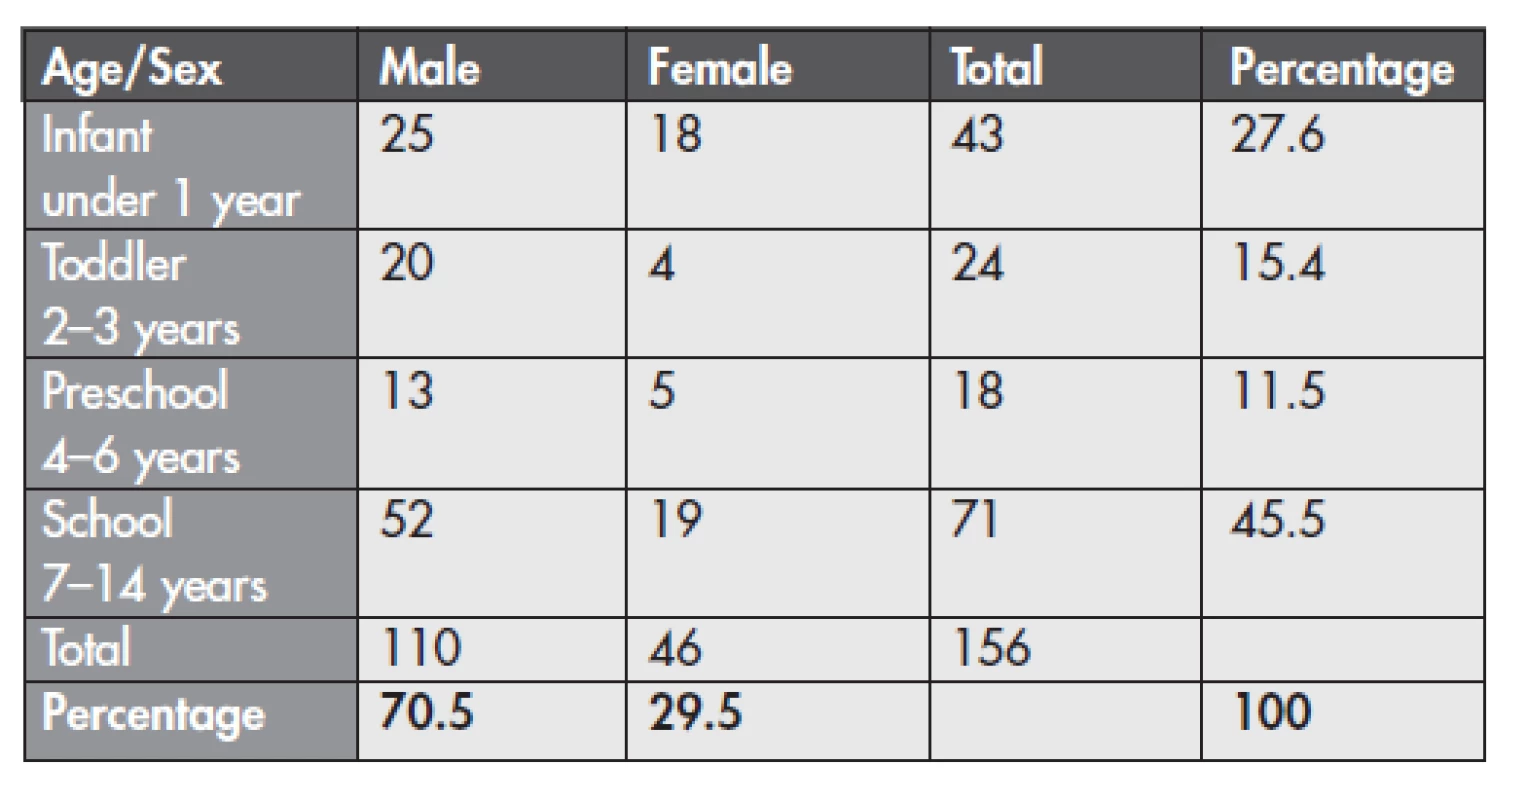 Distribution of cases according to gender and age